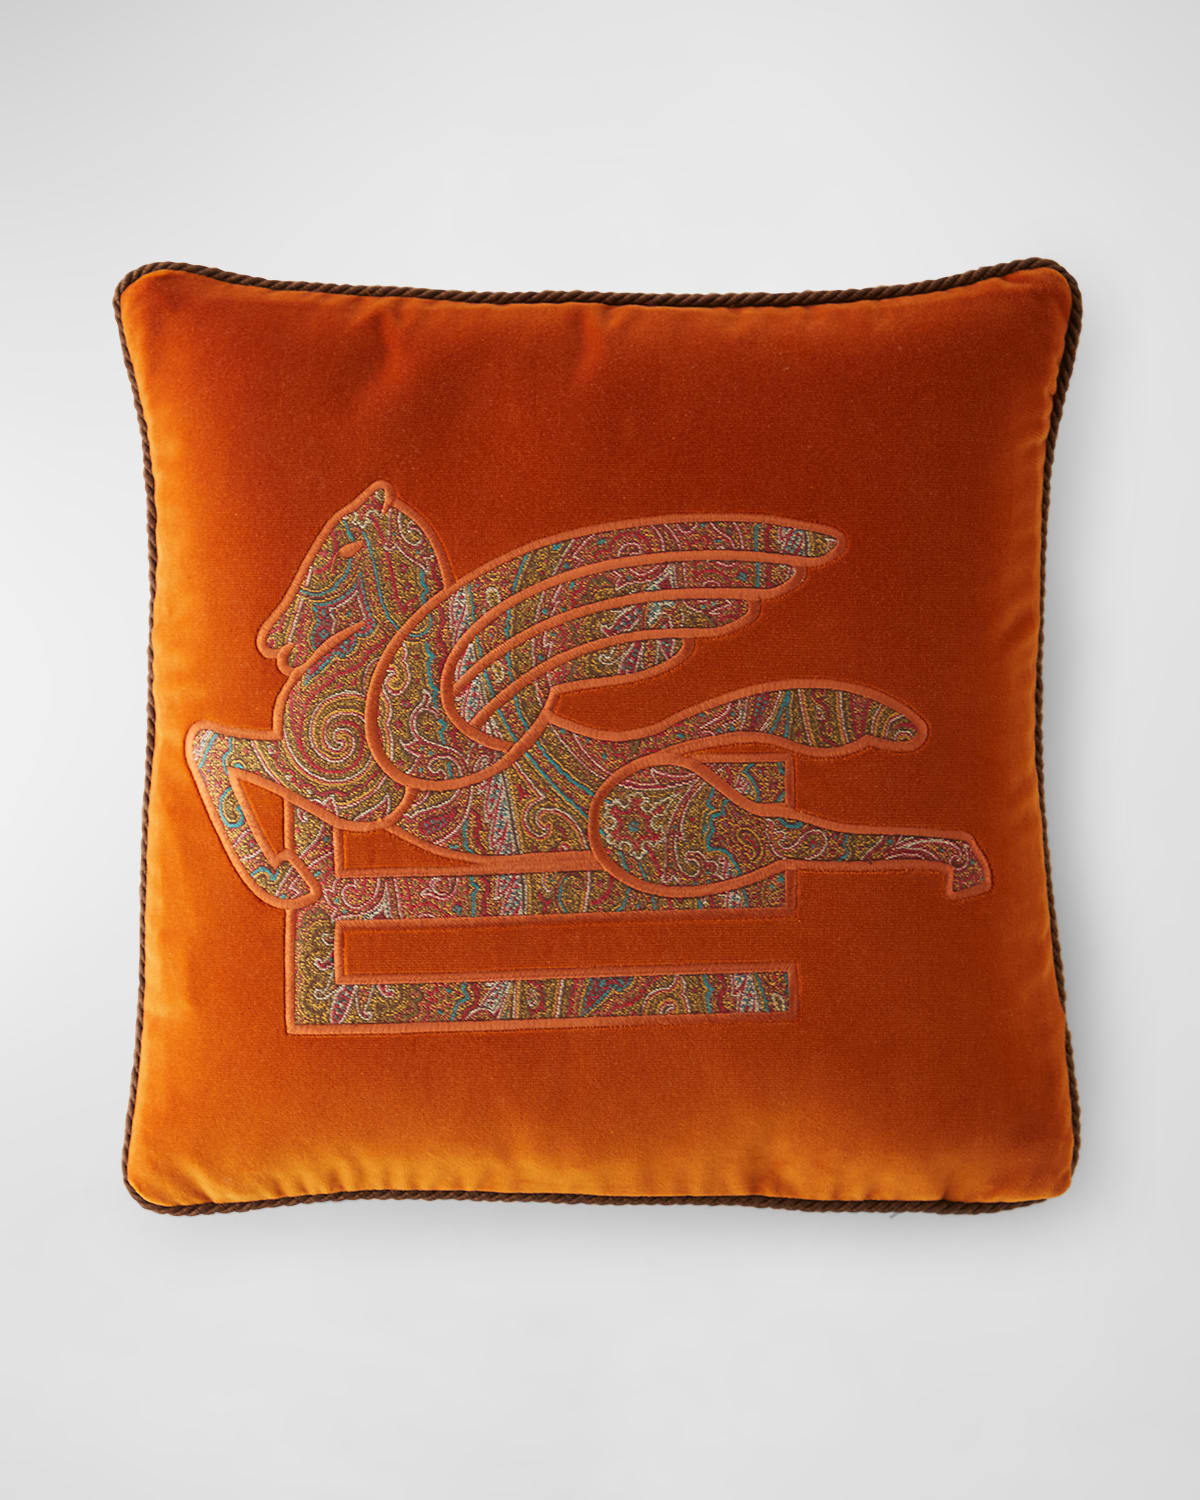 Etro New Somerset Embroidered Pillow, 18" Square In Orange